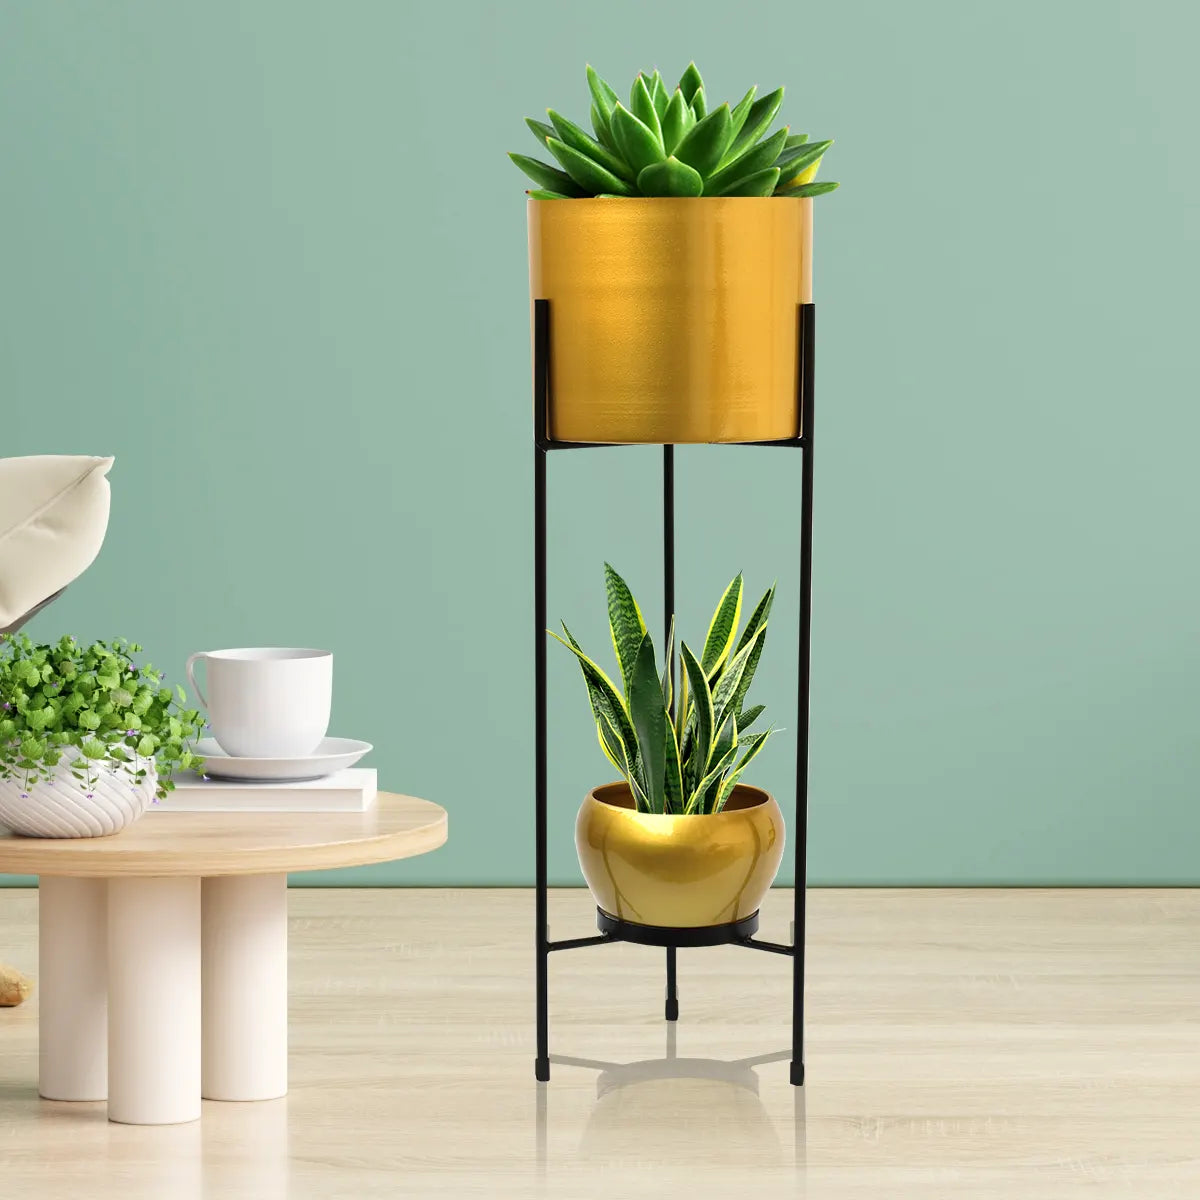 Round Metal Planters/Pots for Indoor Plants with Double Decker Stand Metal Planter Urban Plant Go Golden 